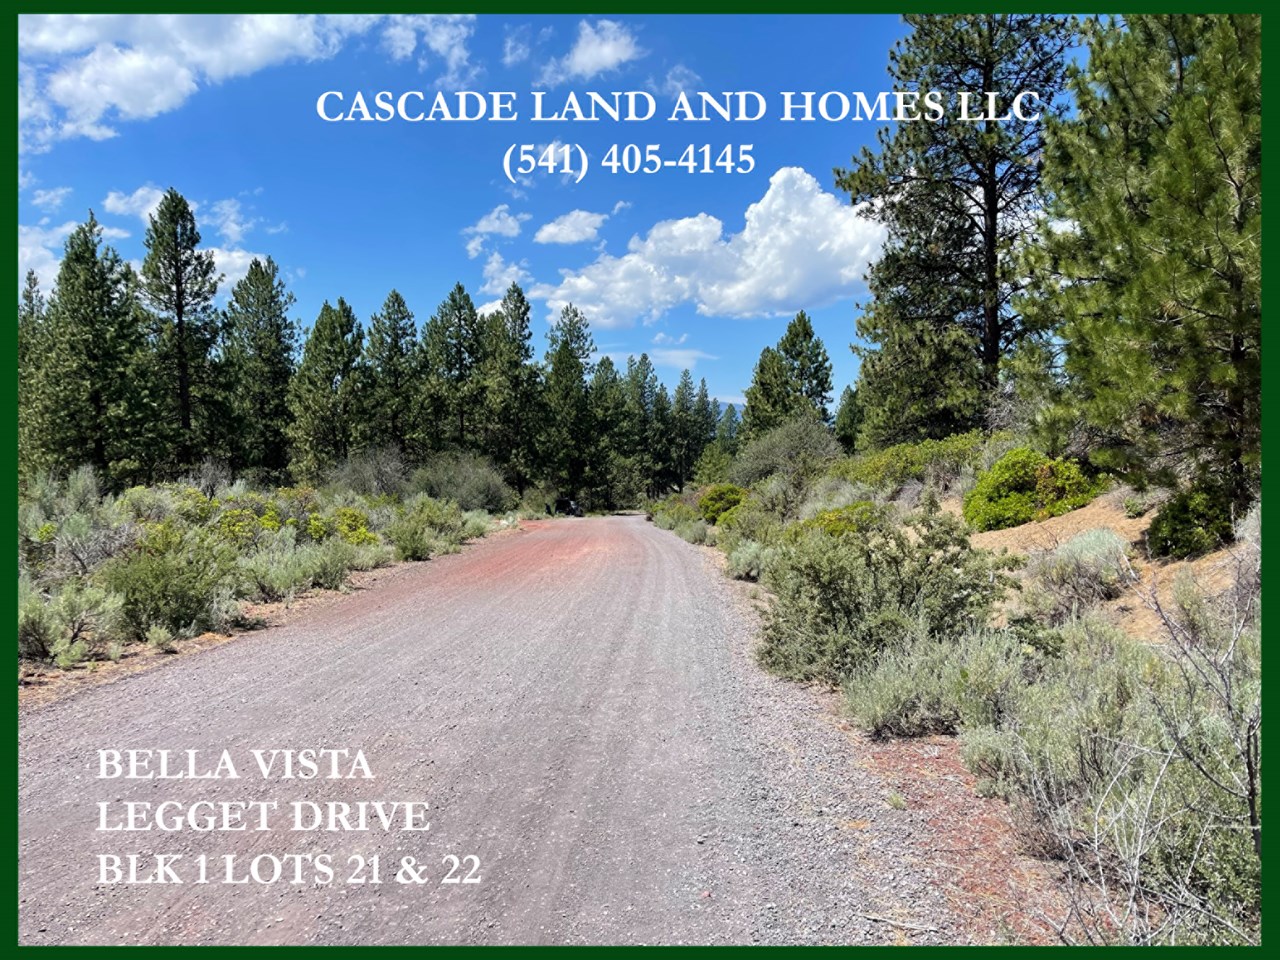 the roads to the properties are compacted gravel and very well maintained for easy access to the properties. the low yearly hoa fees cover road maintenance and snow removal.